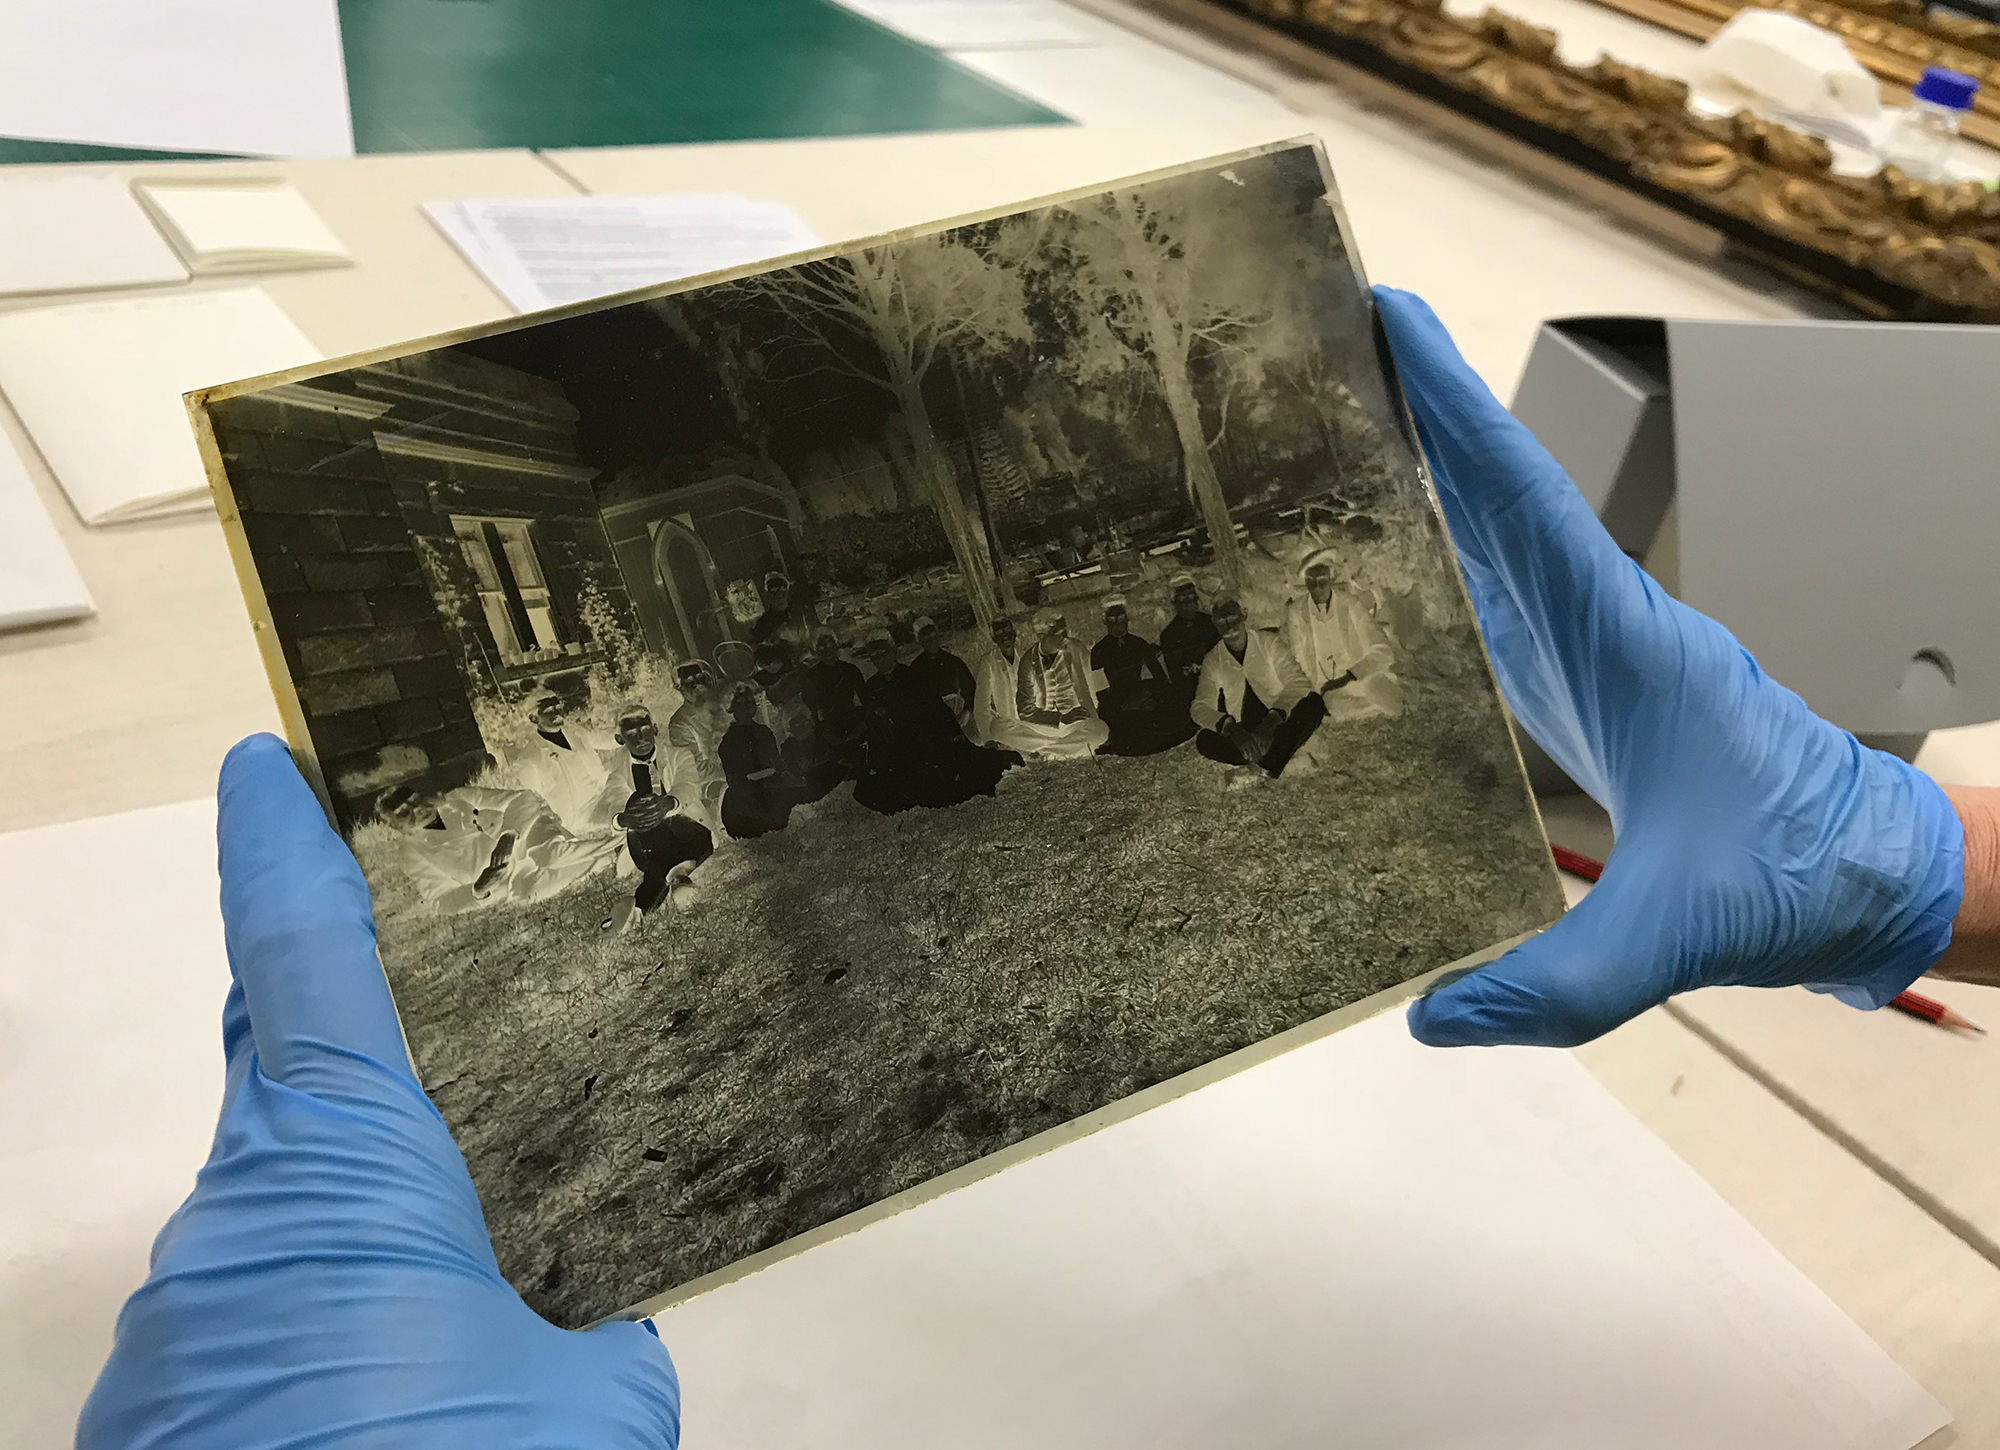 Photograph of blue latex gloved hands, holding a glass plate negative.